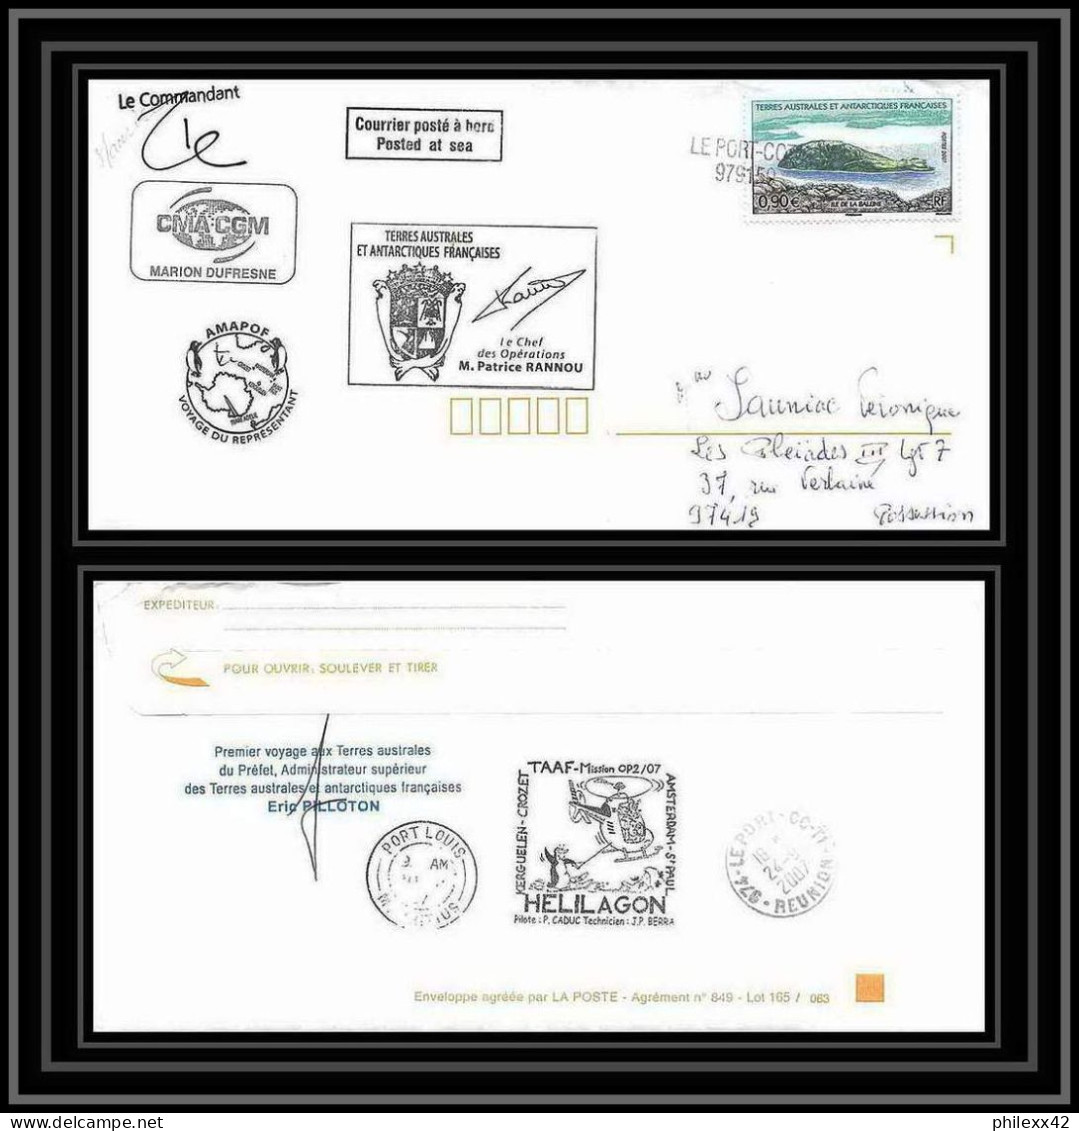 2716 ANTARCTIC Terres Australes (taaf) Dufresne 2 Signé Signed Op 2007/2 Maurice (mauritus) Helilagon Voyage Pilloton - Antarctic Expeditions